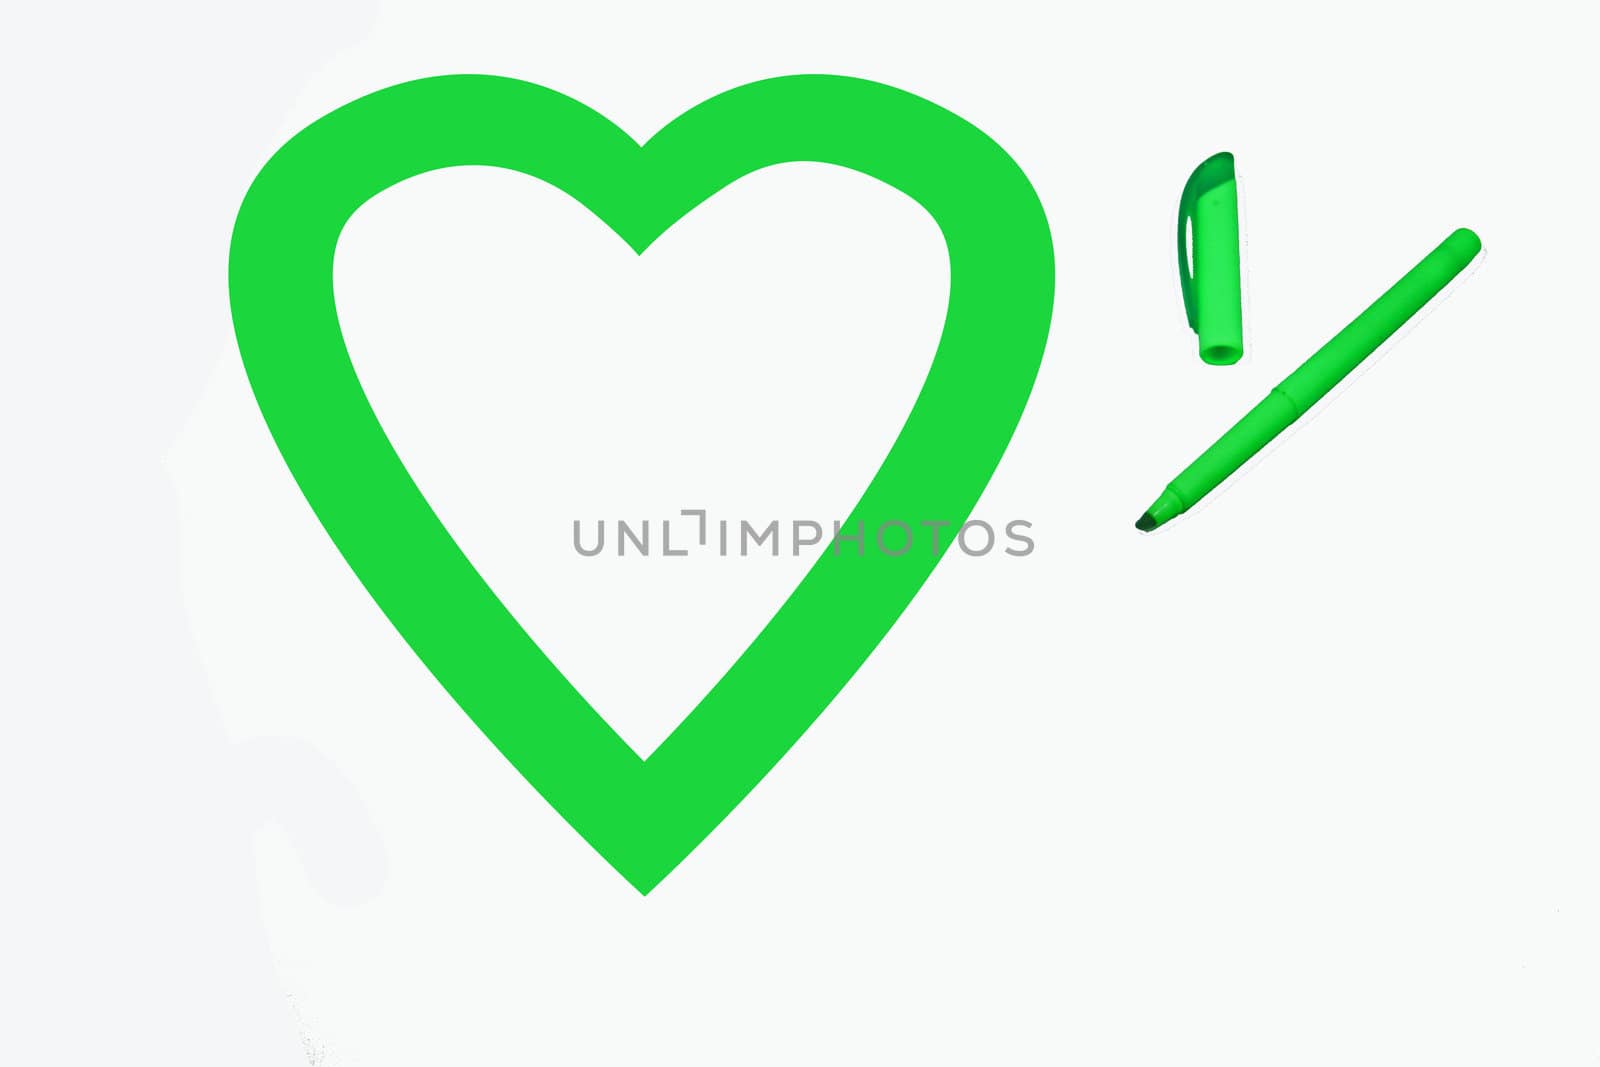 Heart shape colored green by office highlighter on white background